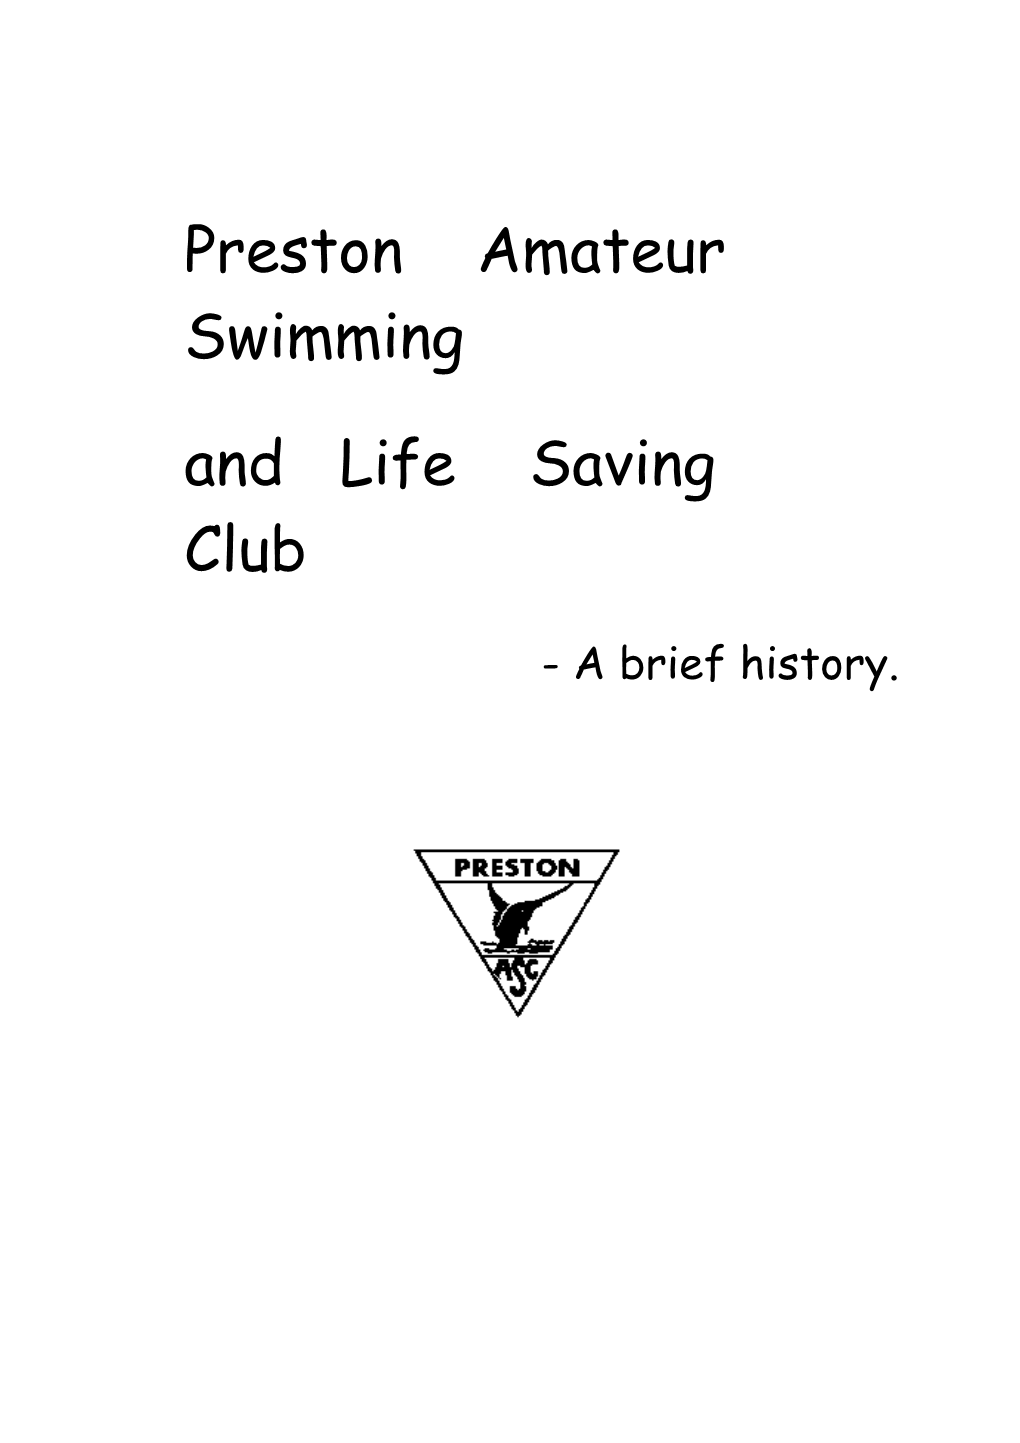 This Short History Has Been Prepared to Mark the 50Th Anniversary of the Preston Amateur